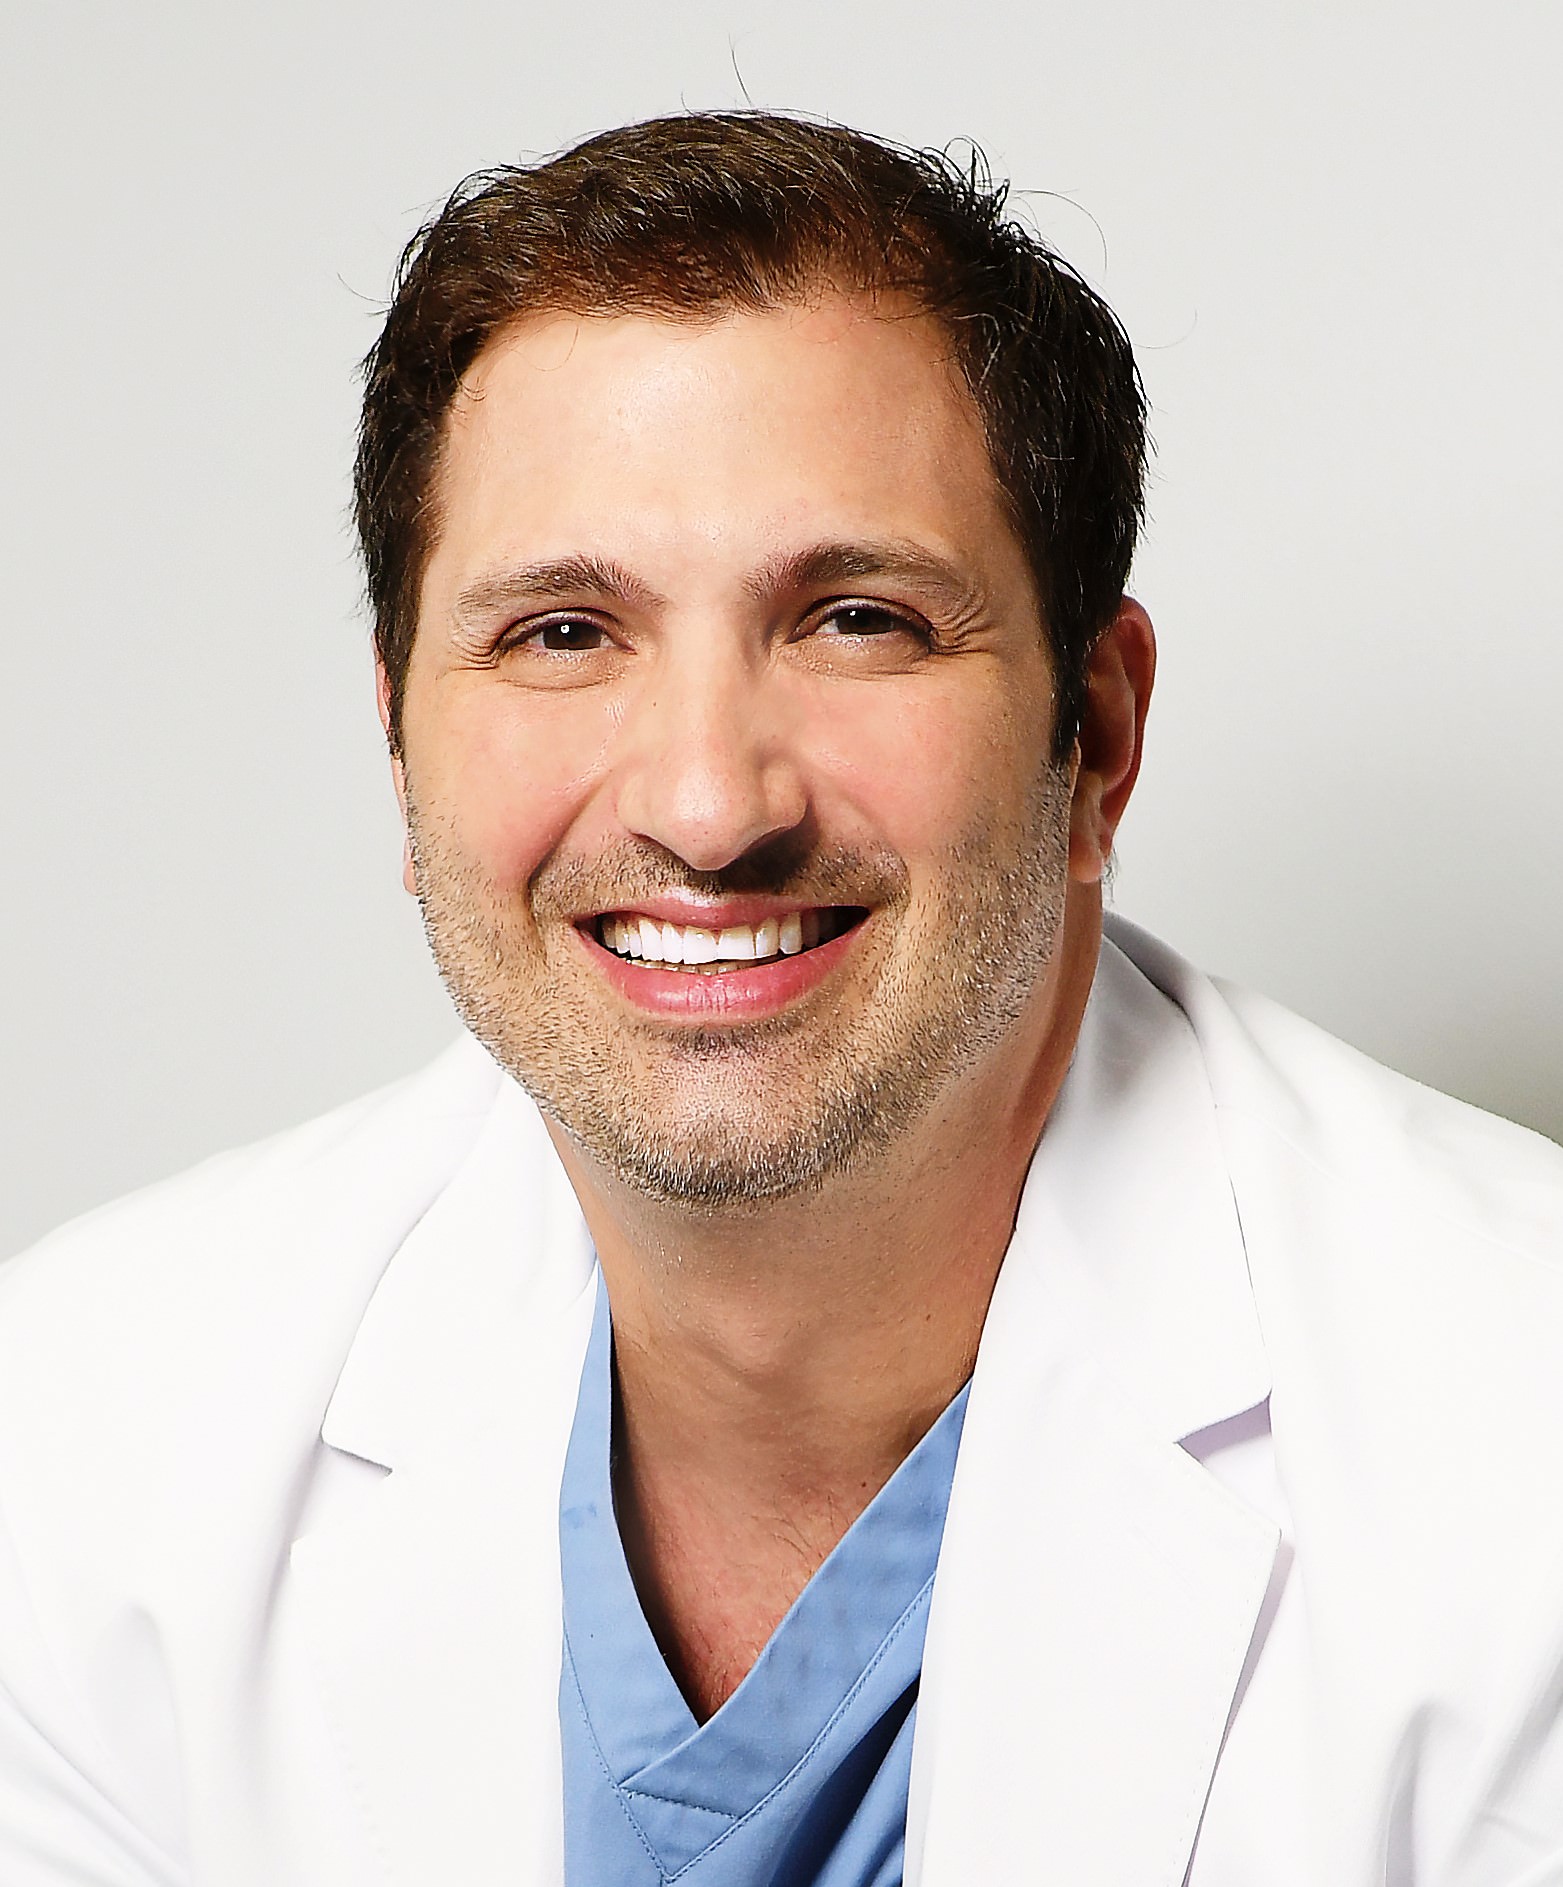 Dr. Stephen Giordano, Medical Director of CAMI